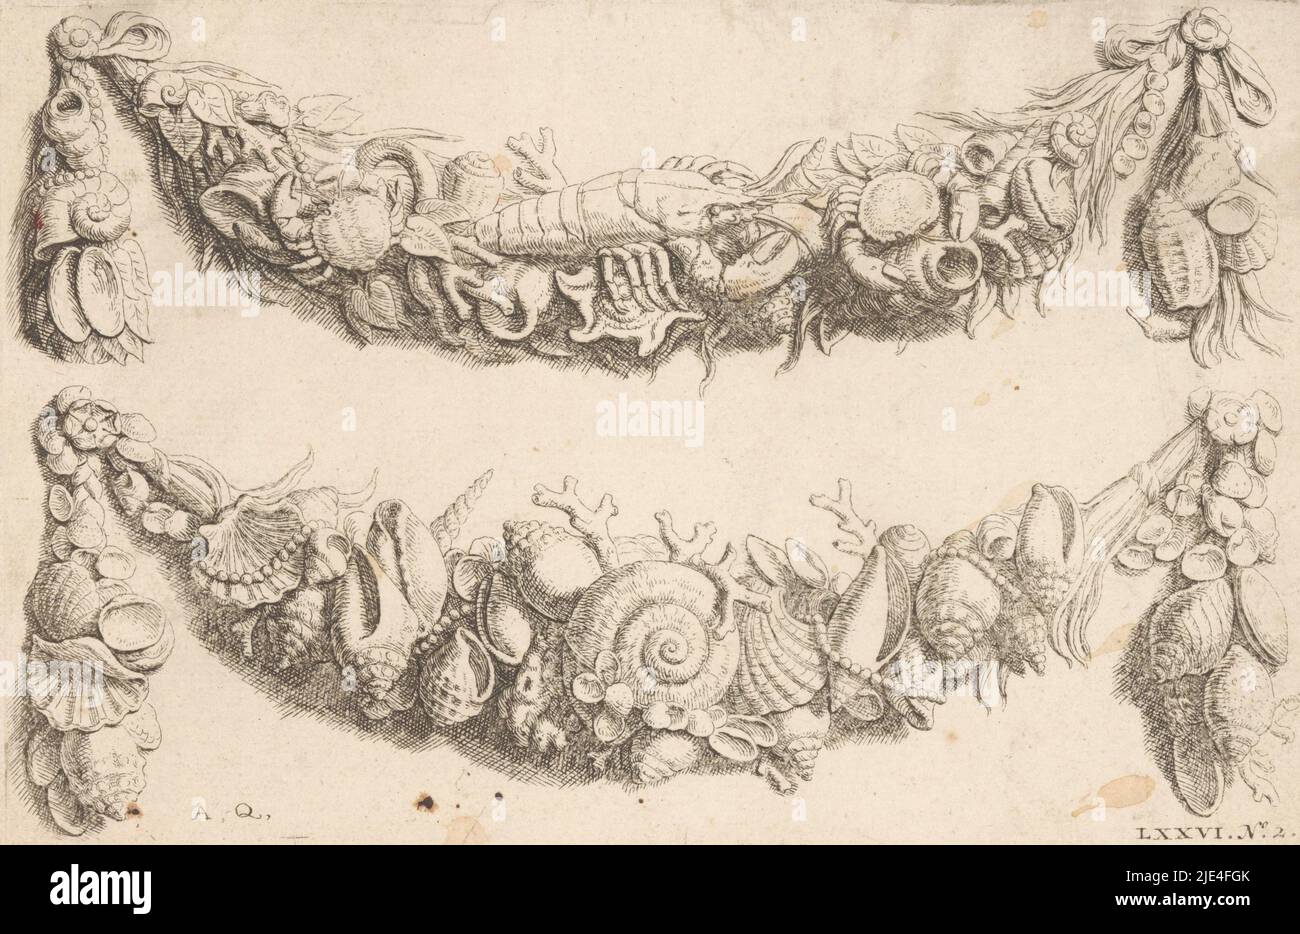 Guirlandes with shells and sea creatures, Hubert Quellinus, after Artus Quellinus, 1719, Two garlands with shells and sea creatures. Sheet LXXVI, No 2., print maker: Hubert Quellinus, Artus Quellinus, (mentioned on object), publisher: David Mortier, Amsterdam, 1719, paper, etching, h 136 mm × w 210 mm Stock Photo